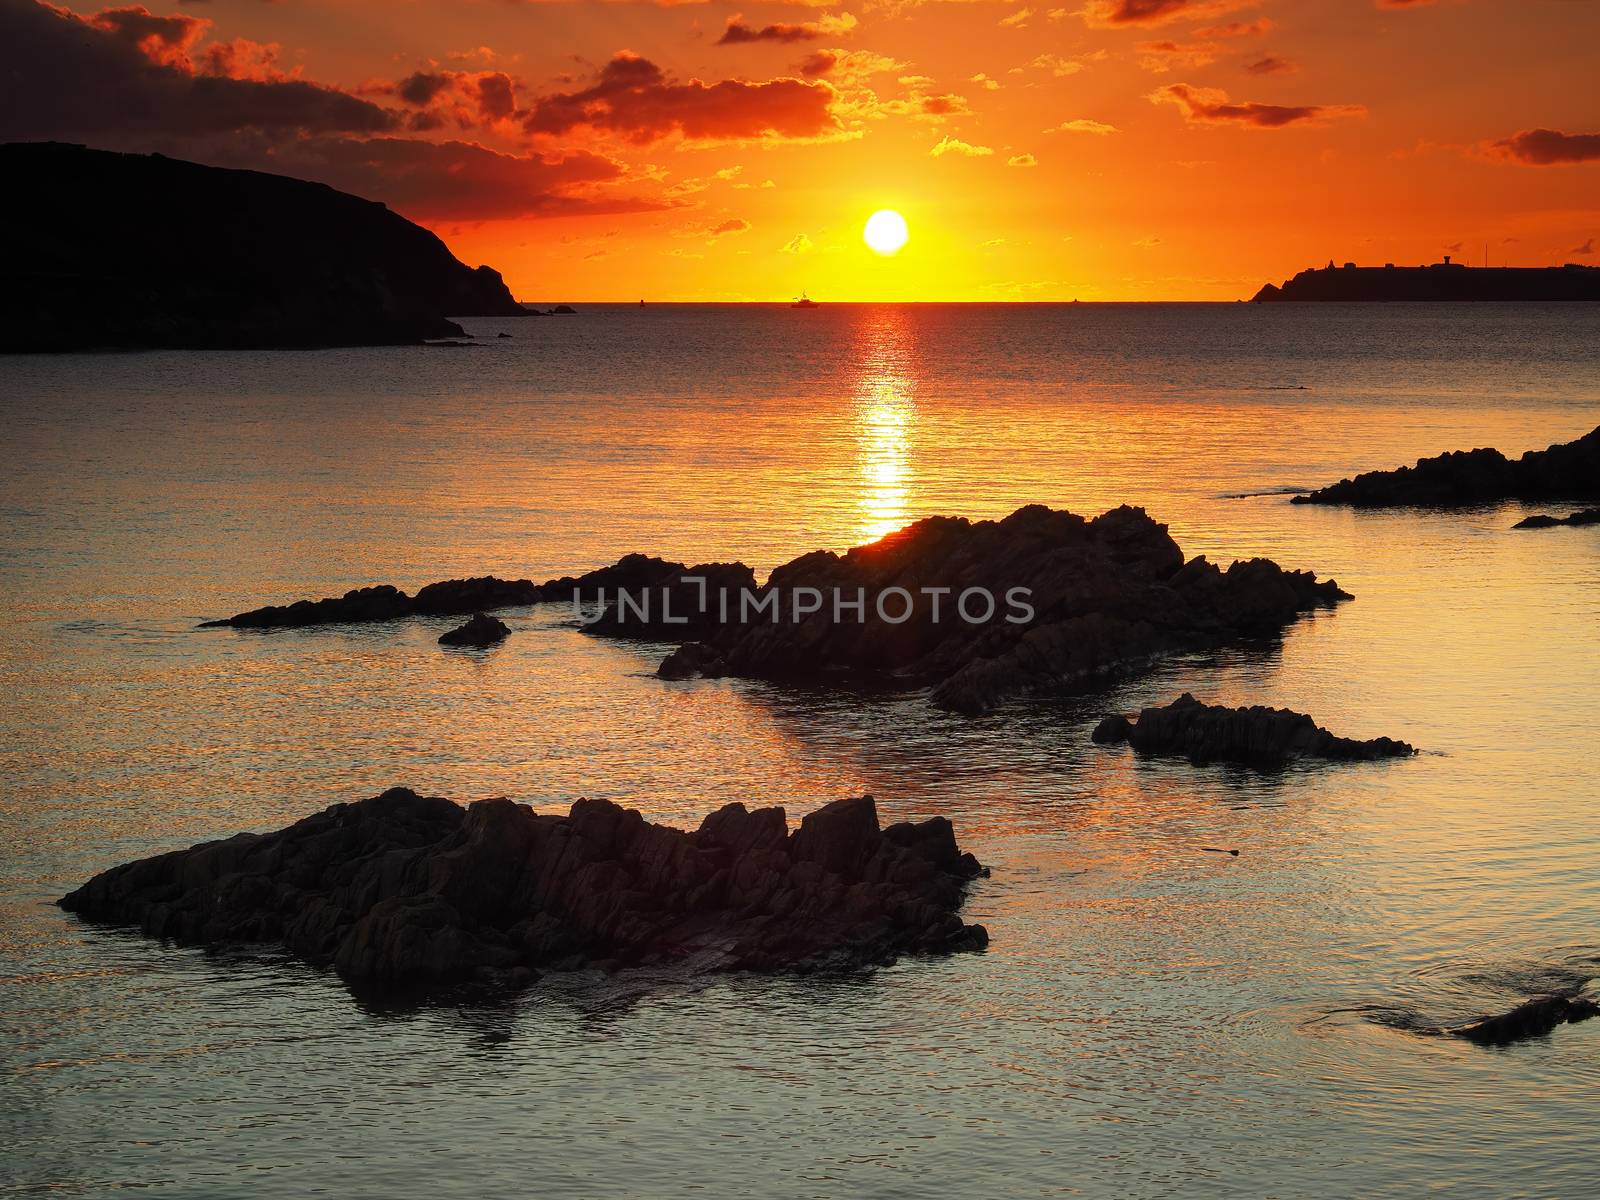 Stunning orange sunset looking out over rocks to West Angle Bay with fishing boat passing by in the background, south Pembrokeshire coast, Wales, UK